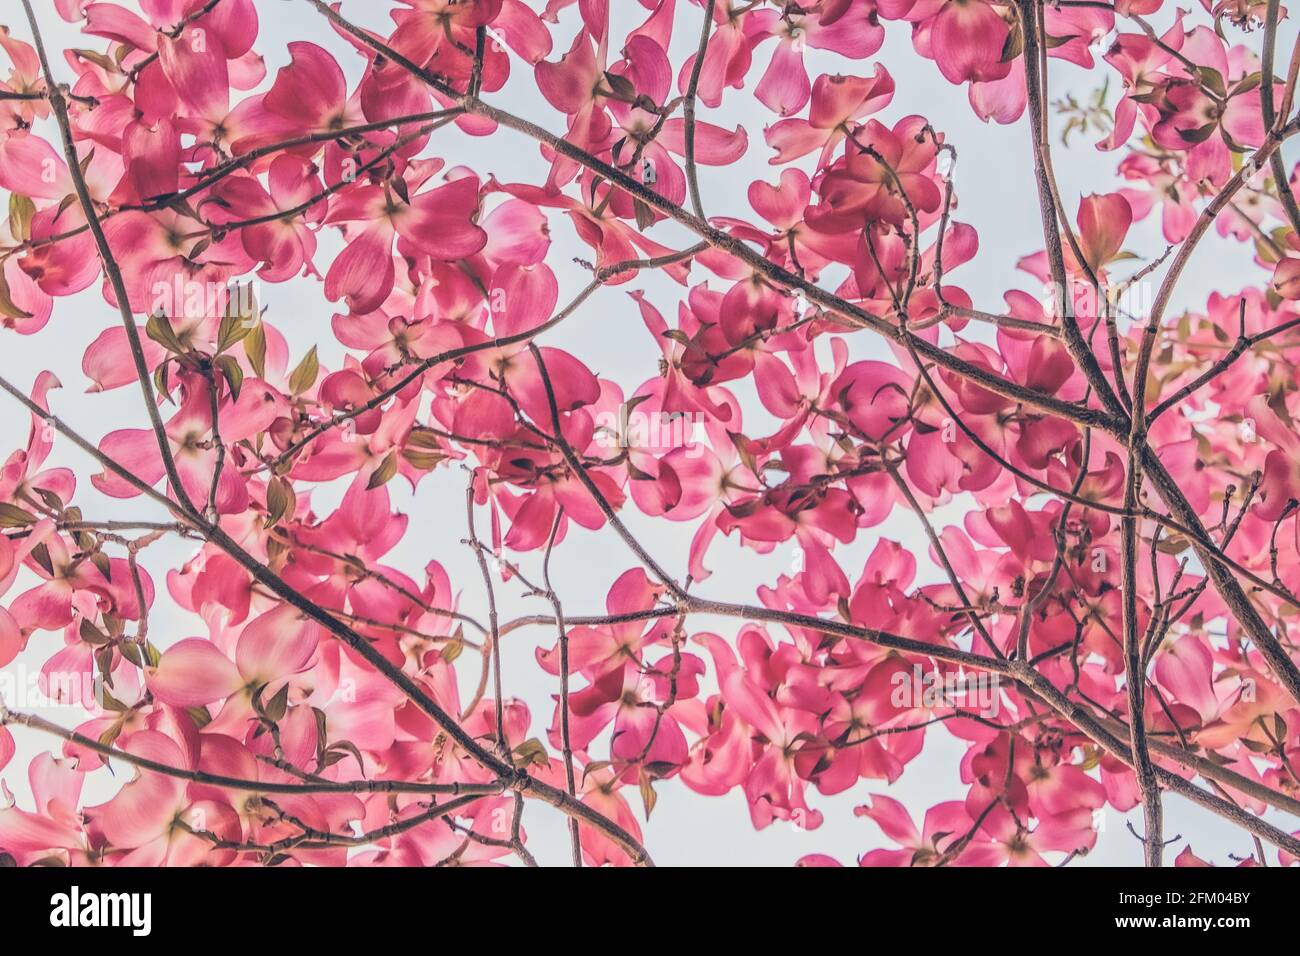 Looking up through the canopy of a pink blooming dogwood tree Stock Photo